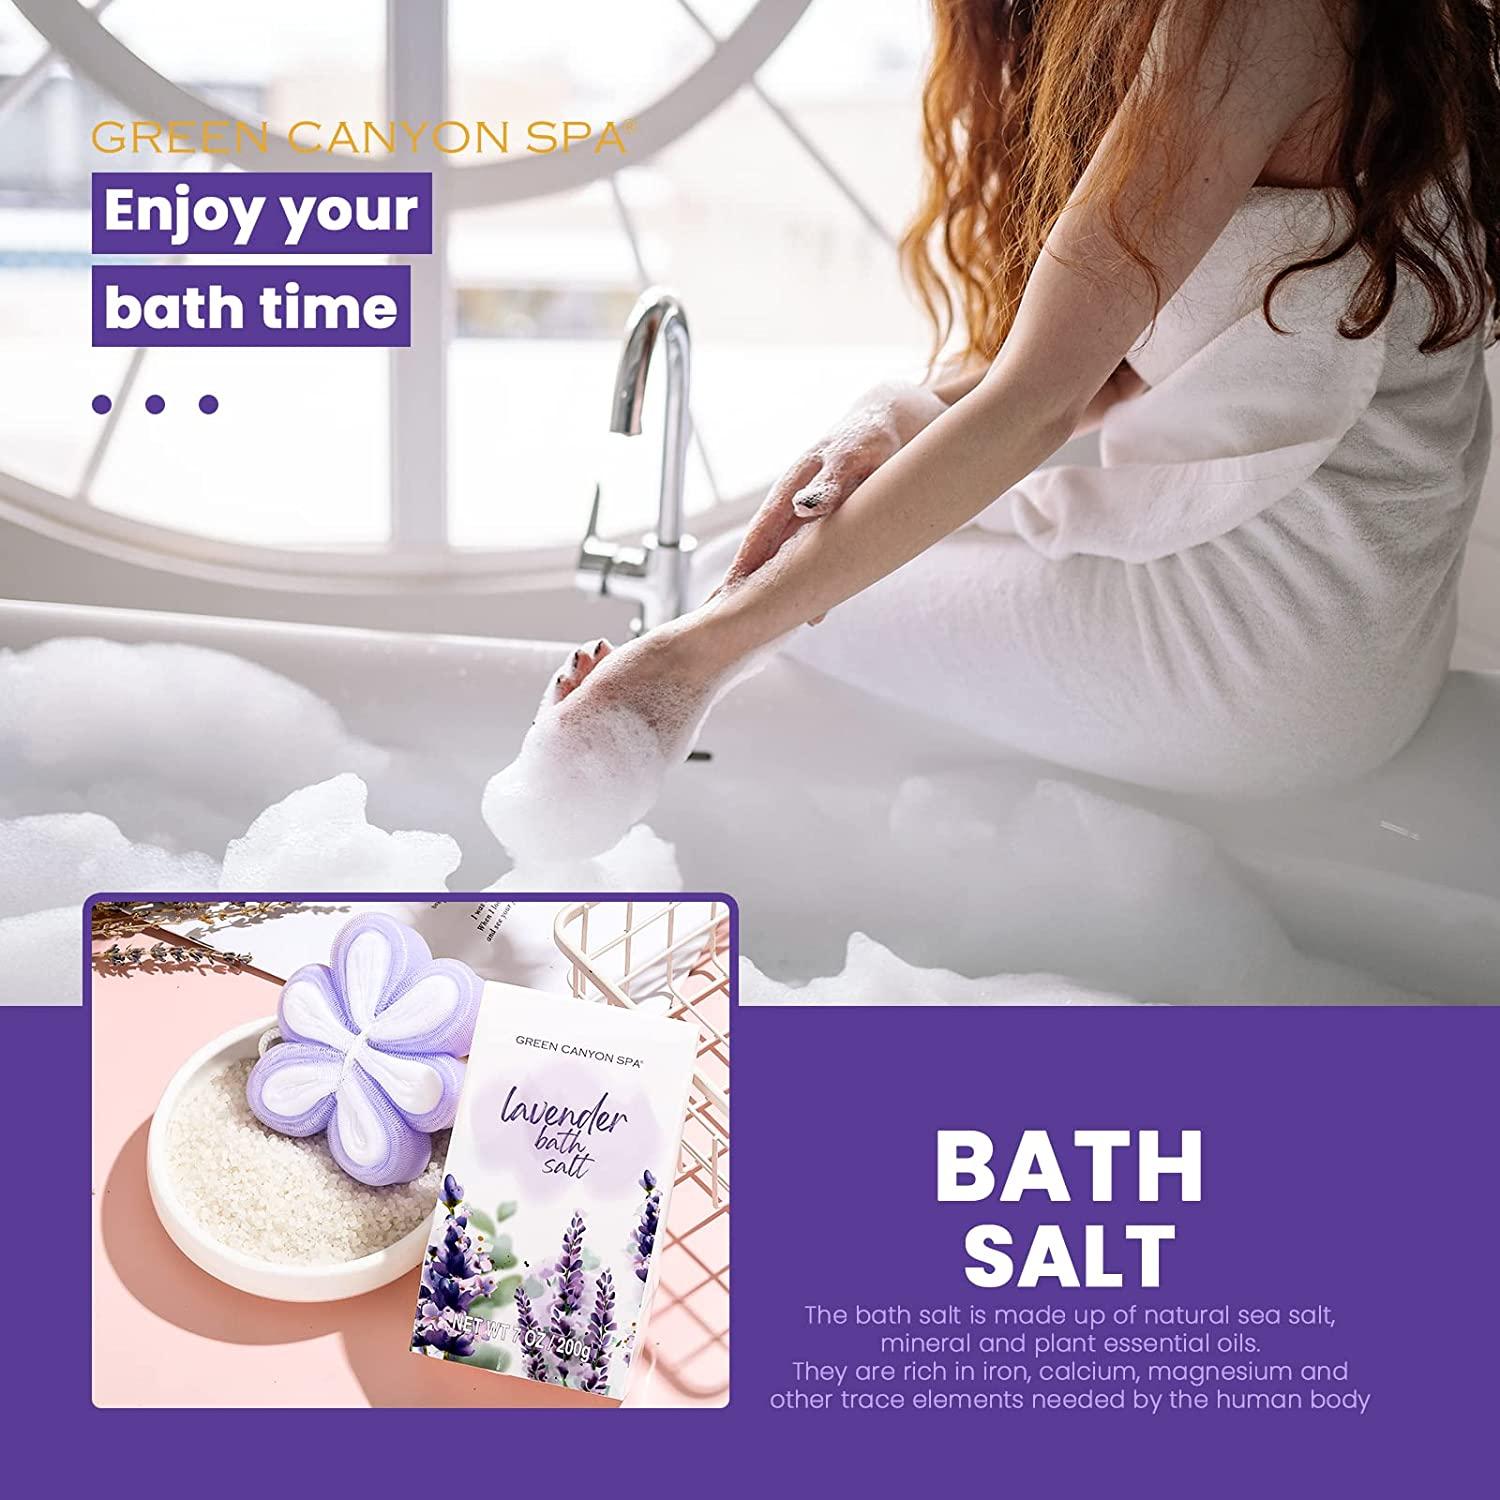 Bath Gift Set for Women - 11 Pcs Lavender Body Spa Basket, Holiday  Christmas Gifts for Her 